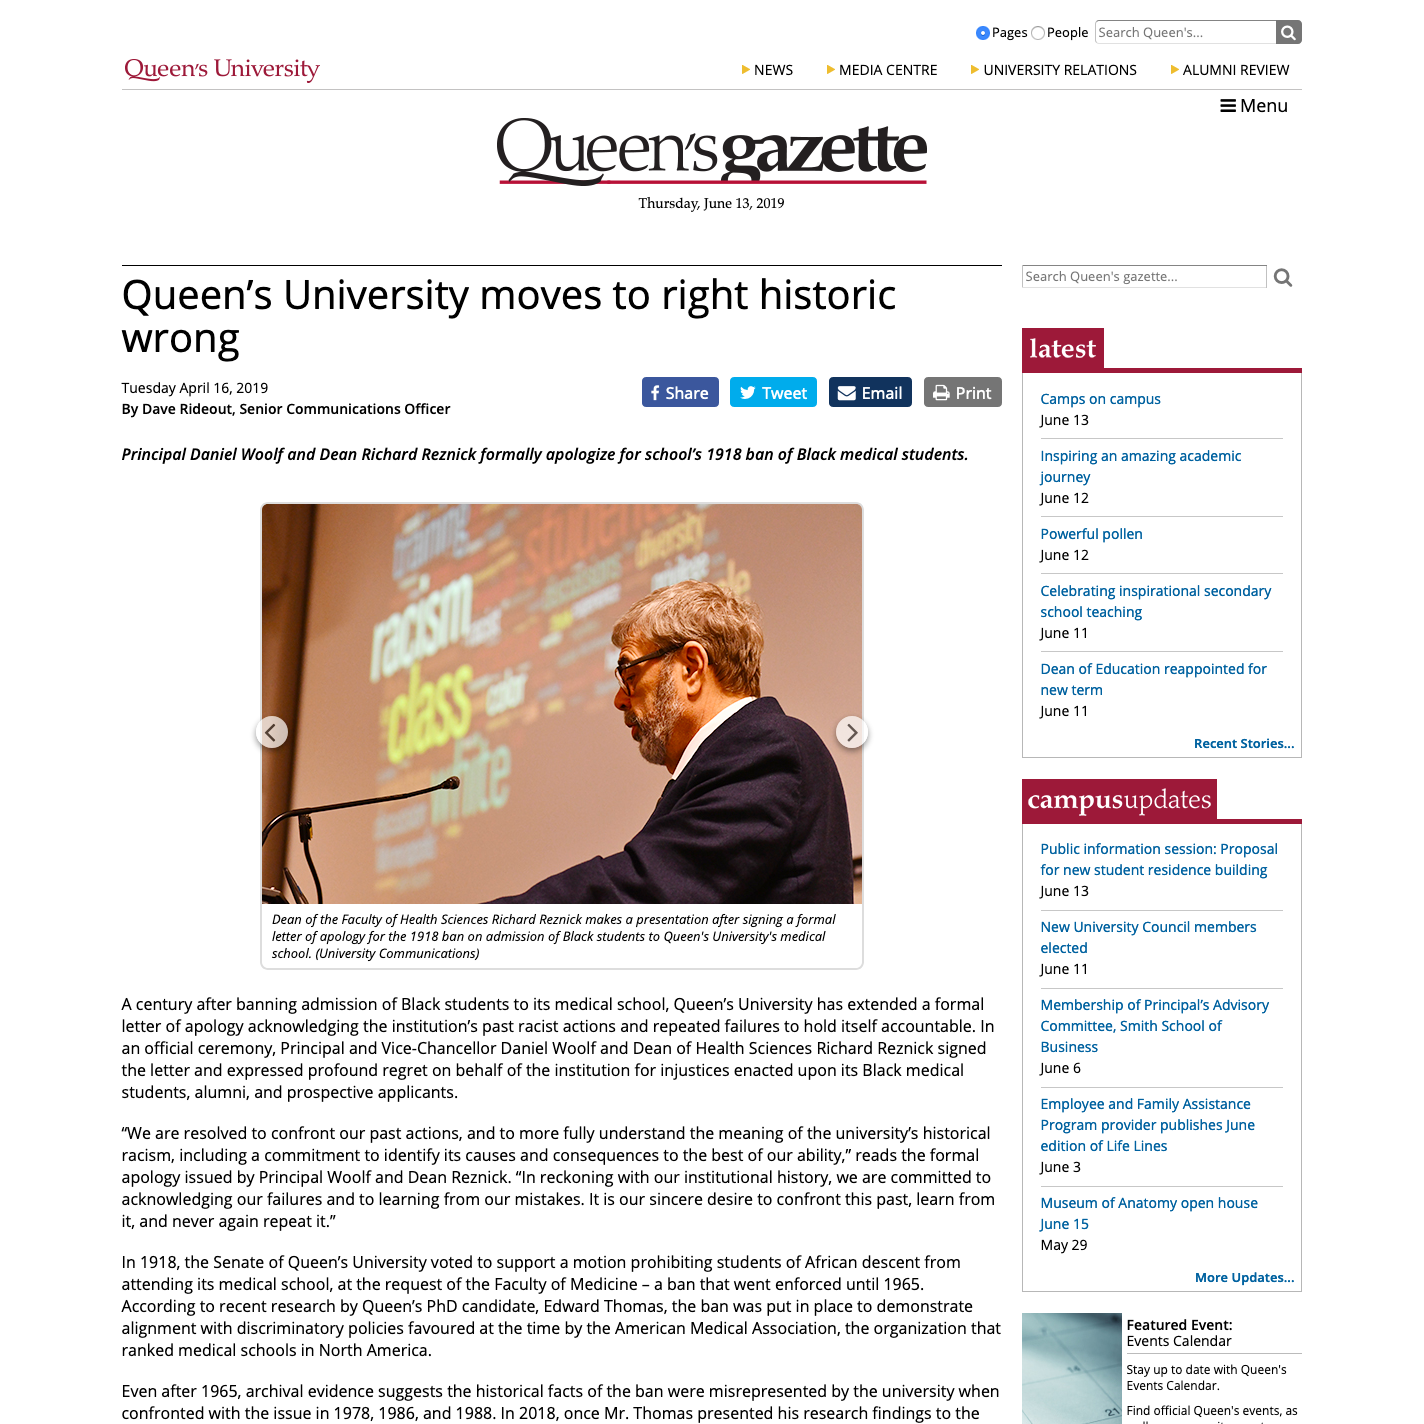 Queen’s University moves to right historic wrong